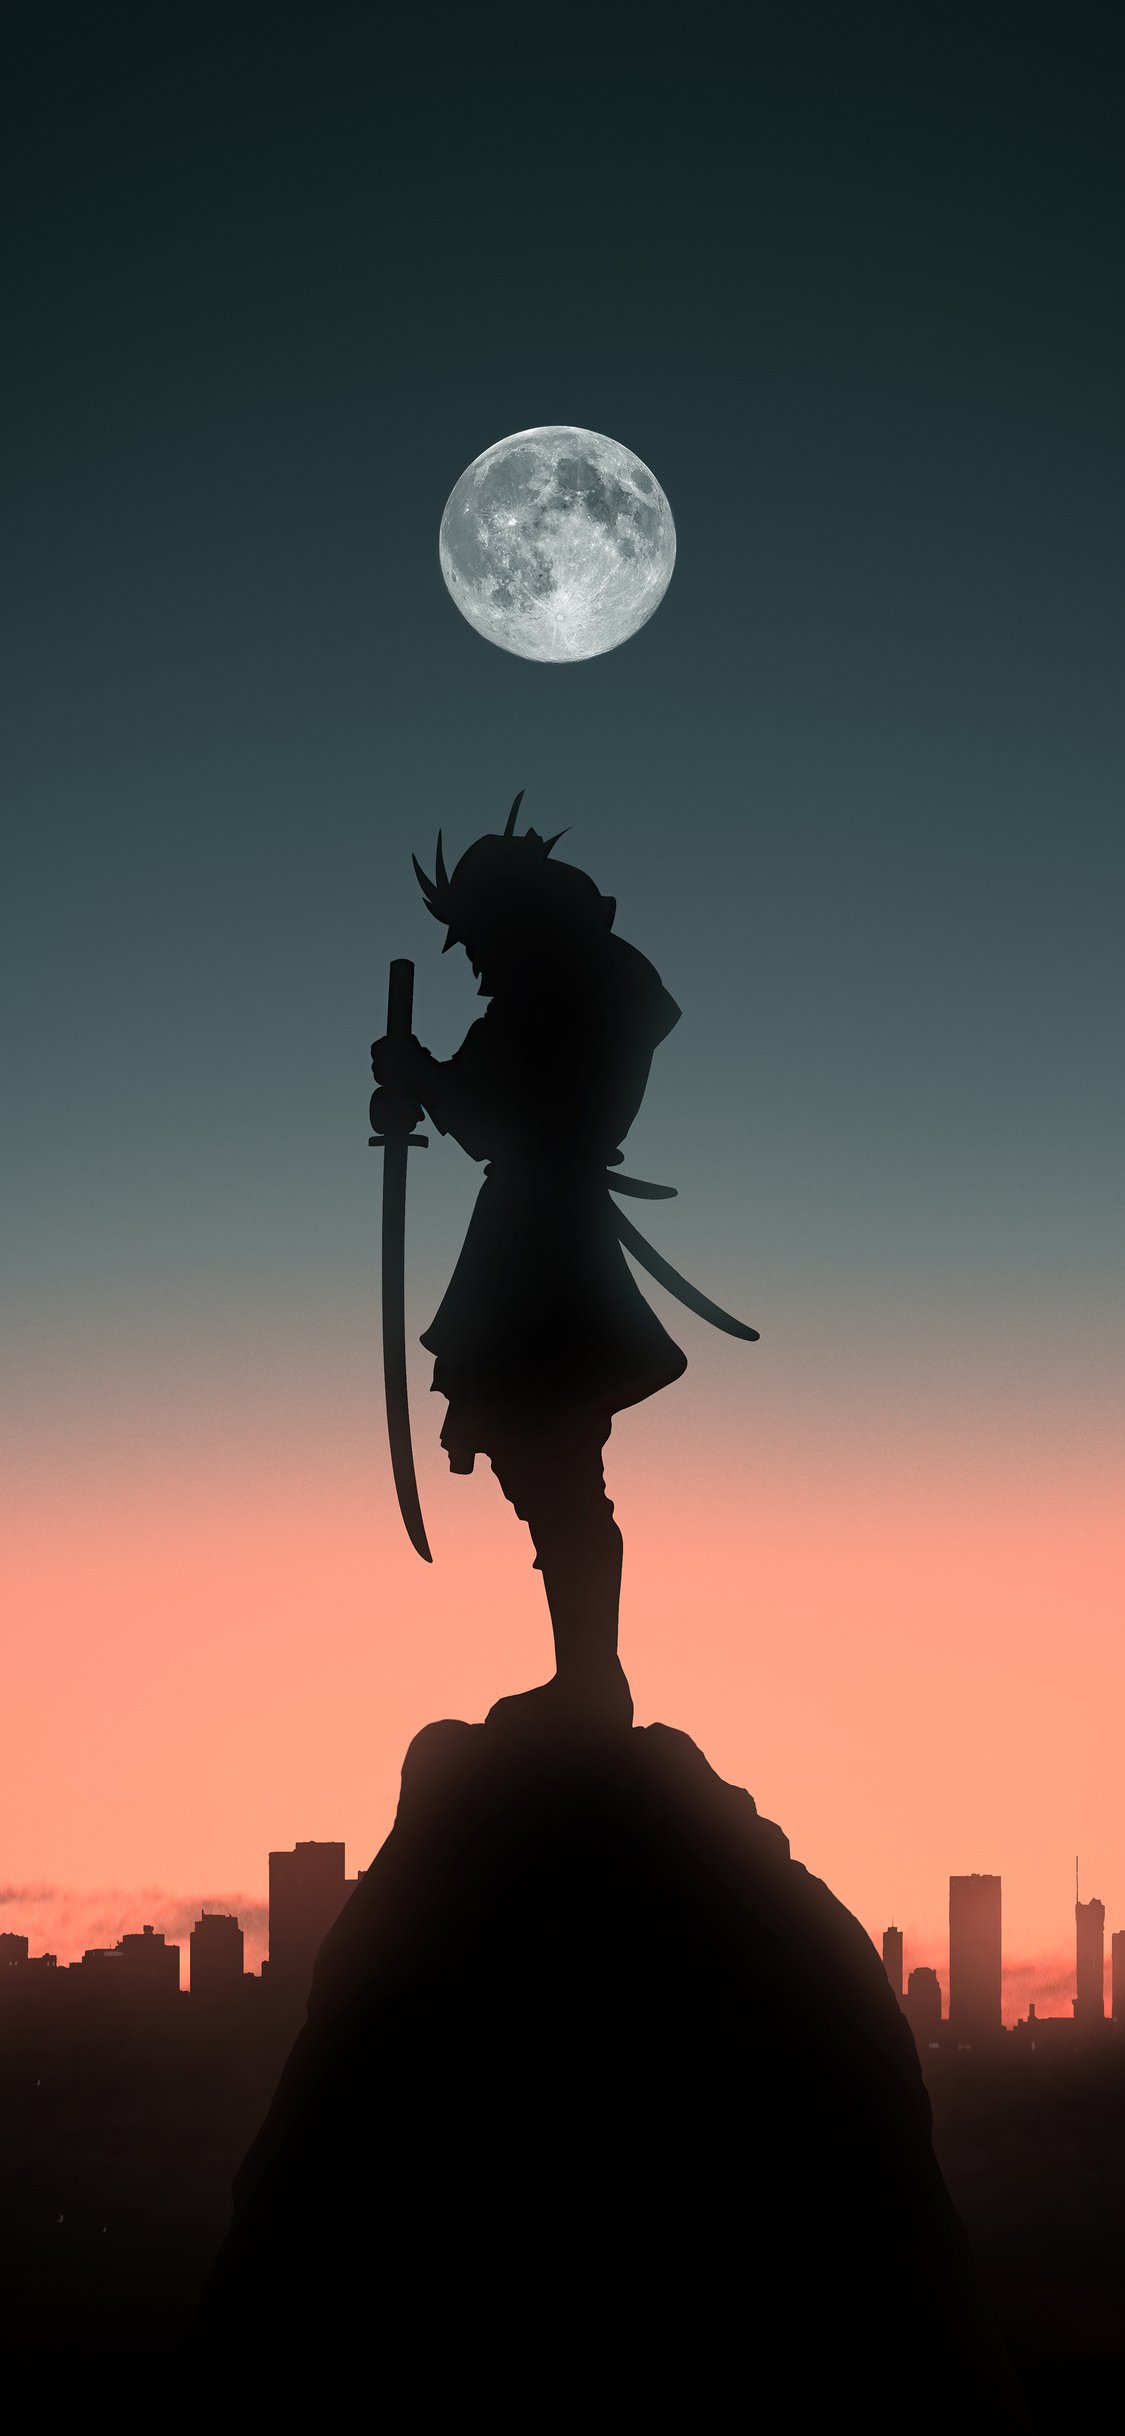 Samurai Ninja With Sword 4k iPhone XS, iPhone iPhone X HD 4k Wallpaper, Image, Background, Photo and Picture